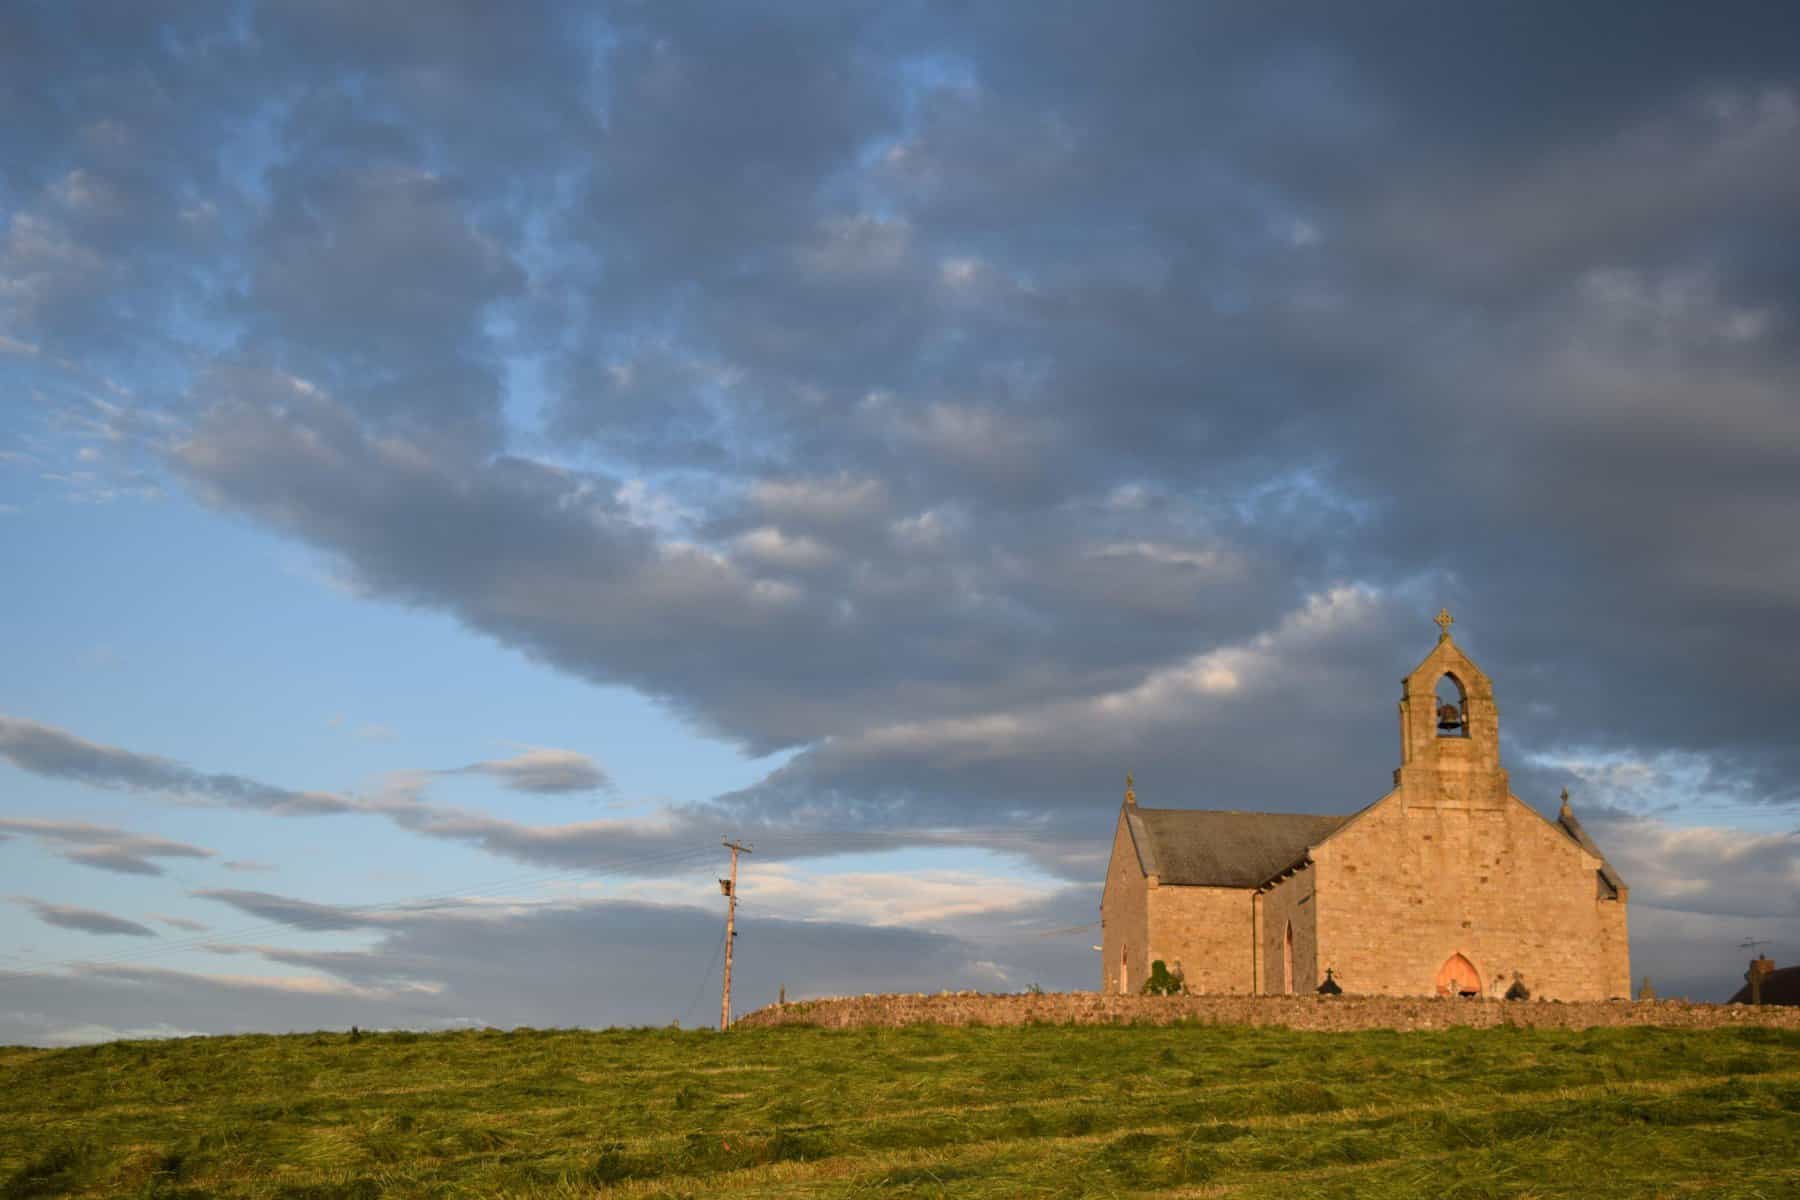 a stone church sits in a field with golden light and shining on it, a blue sky with gray clouds